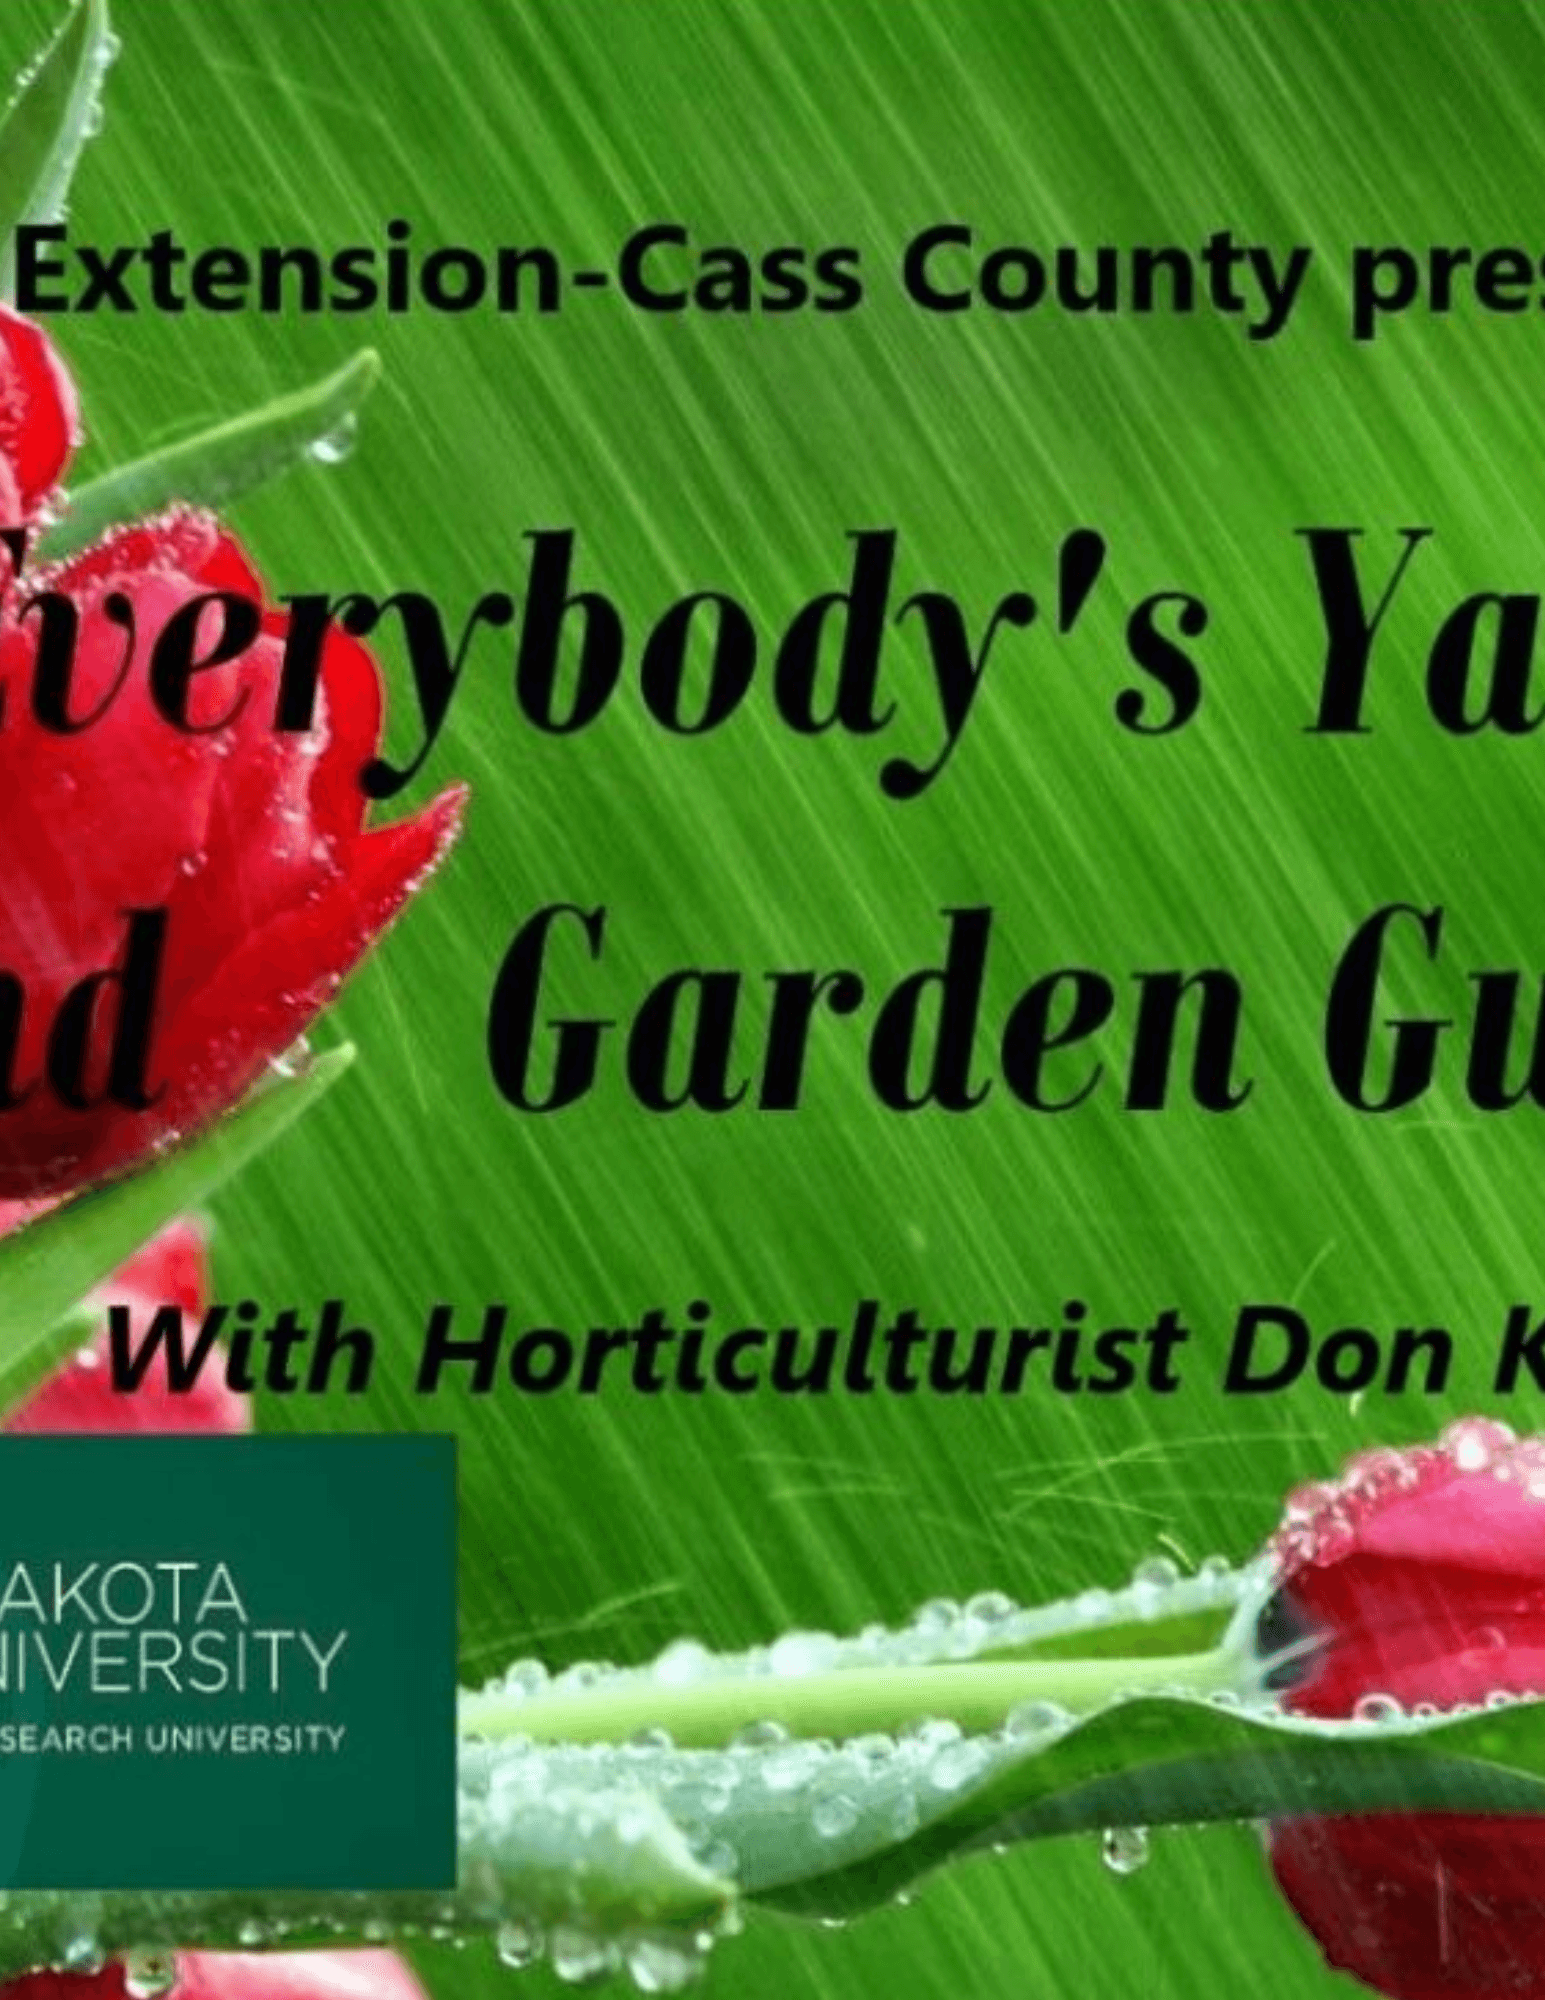 Everybody's Yard and Garden Guide 